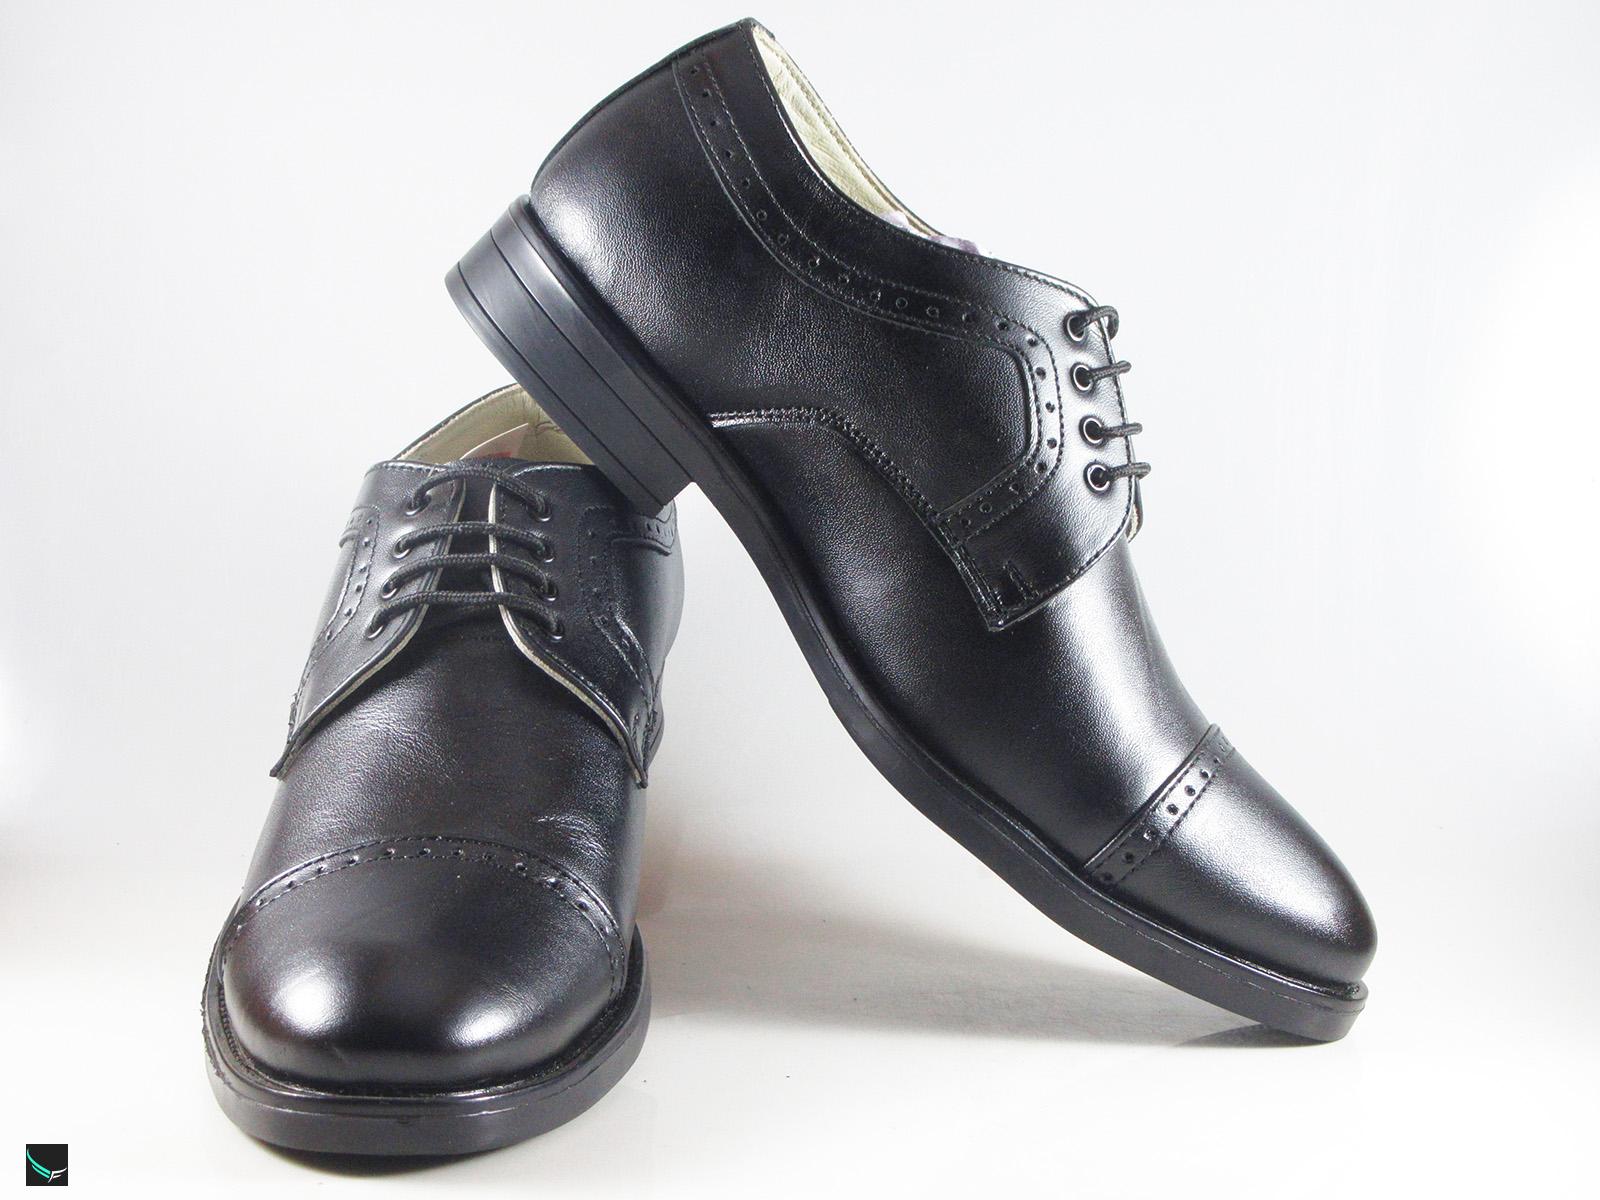 Black Leather Office Shoes For Men - 4570 - Leather Collections On ...